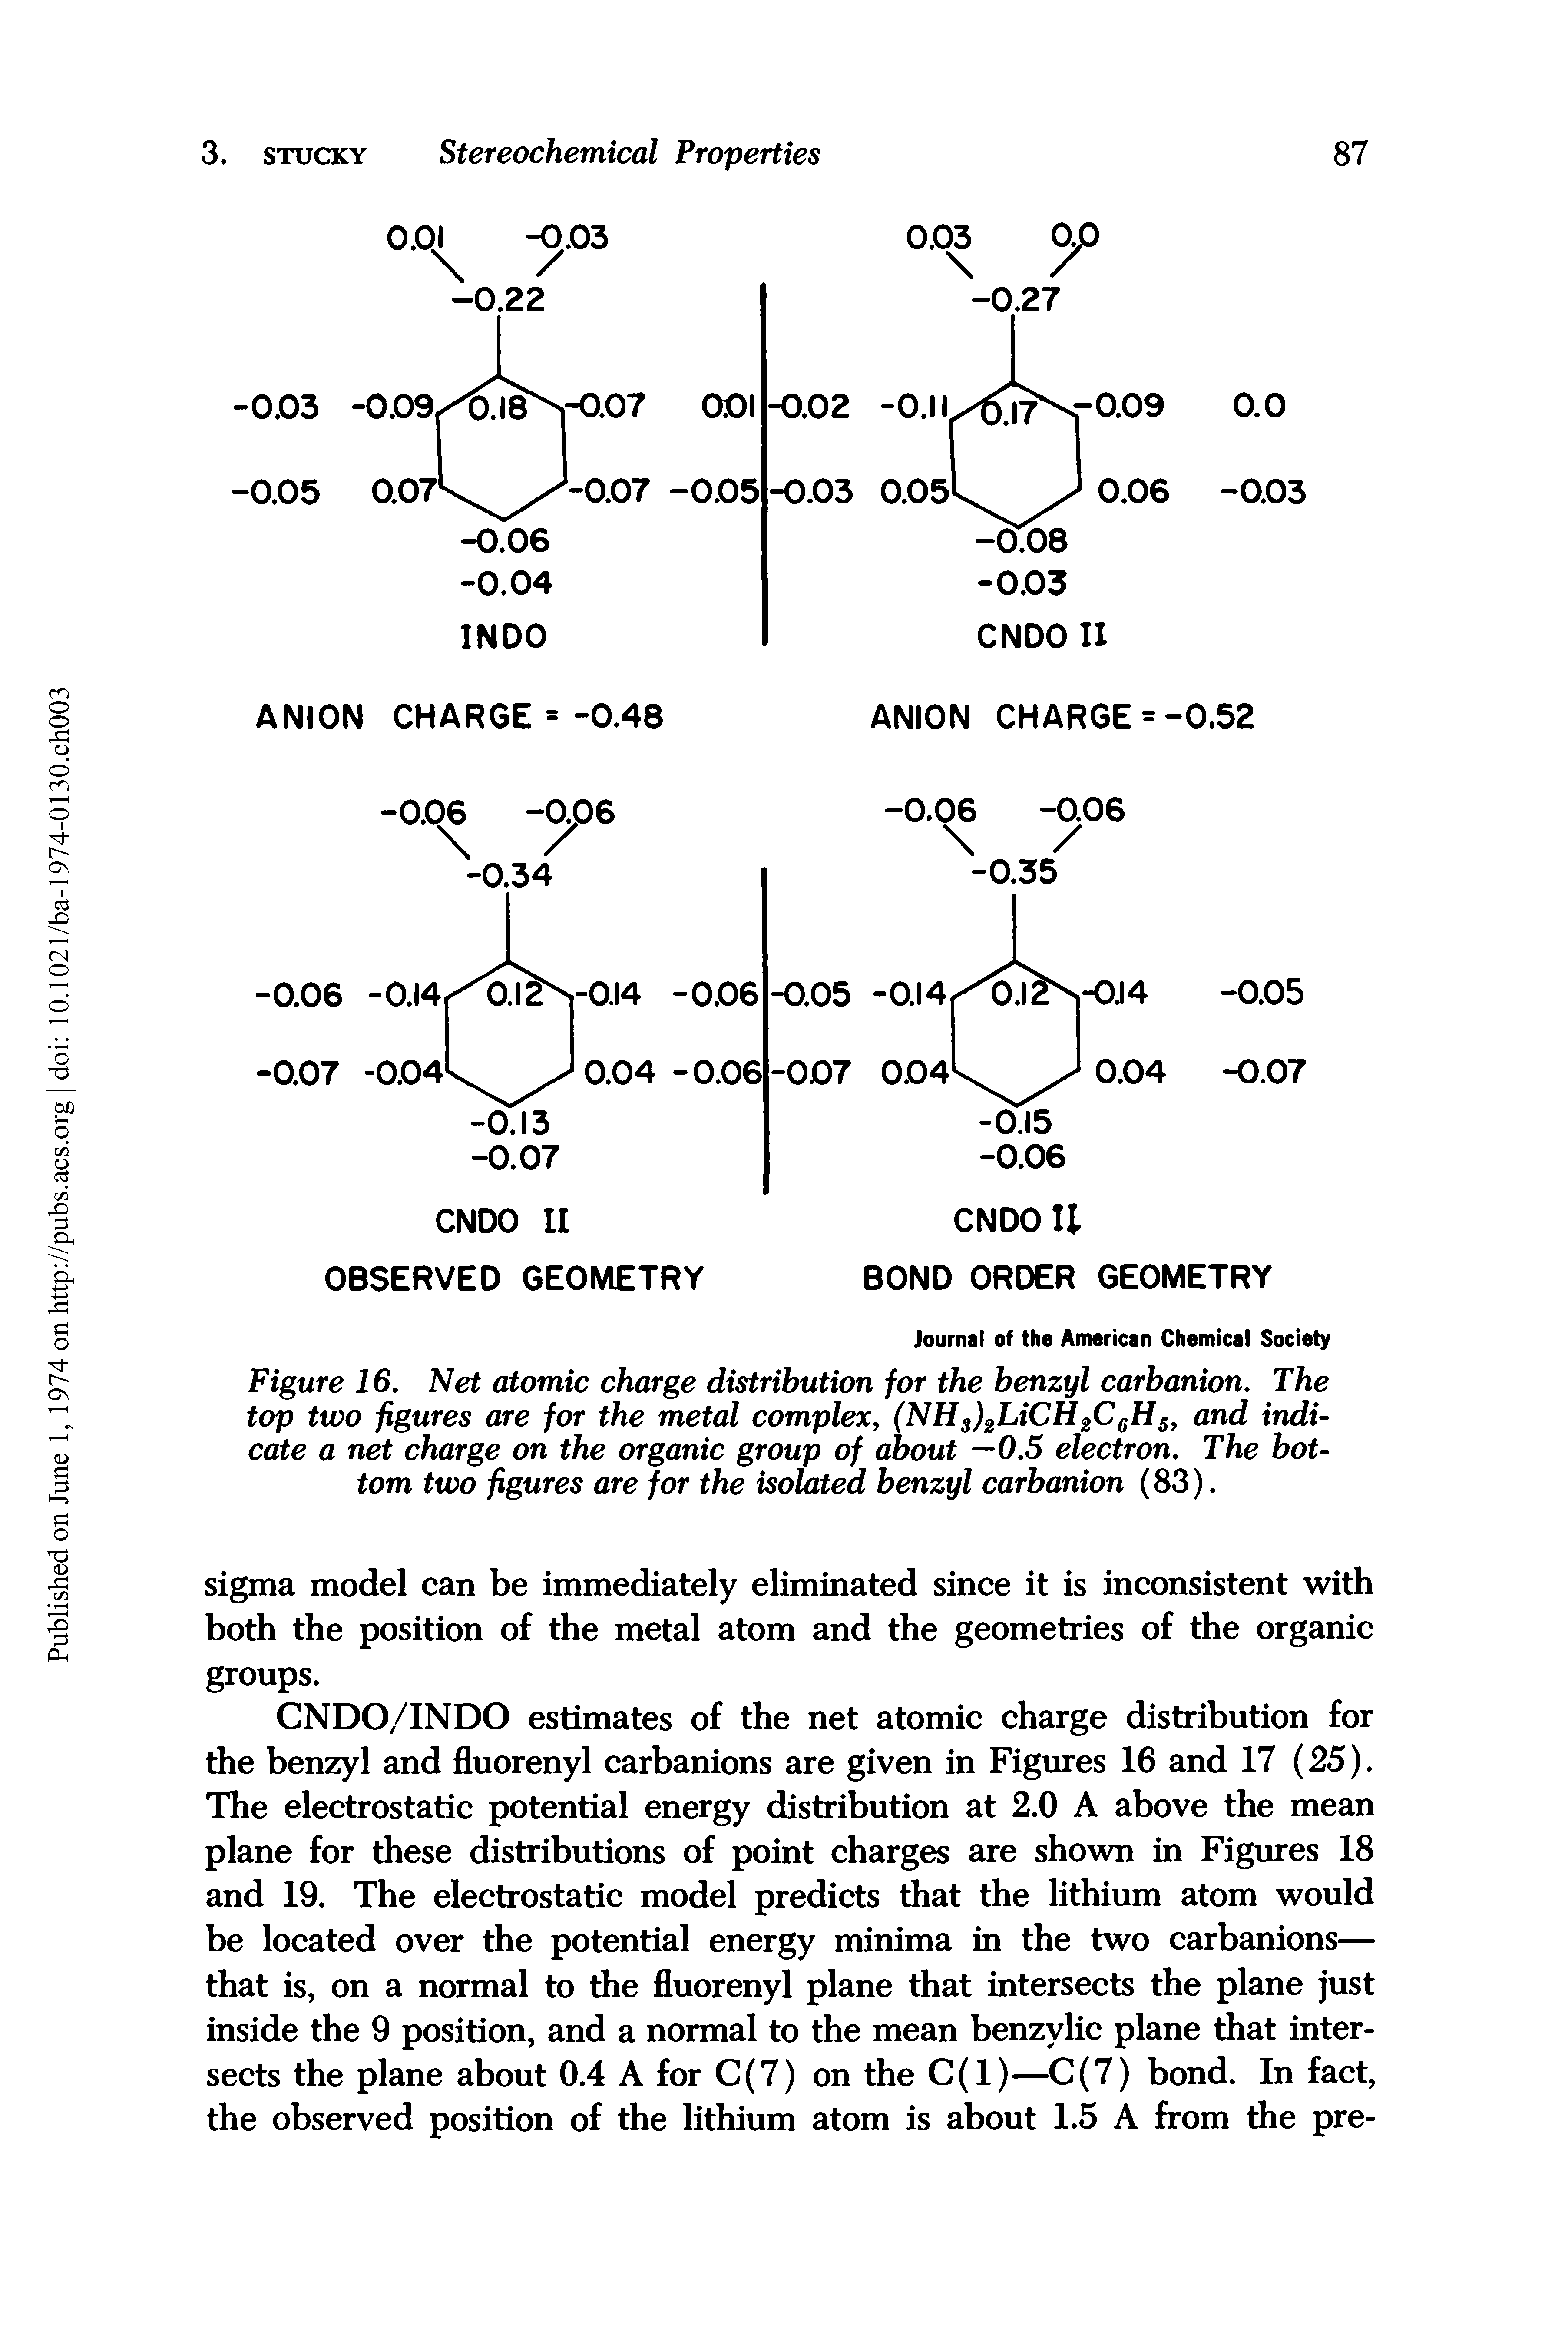 Figure 16. Net atomic charge distribution for the benzyl carbanion. The top two figures are for the metal complex, (NHs)2LiCH2C6H5, and indicate a net charge on the organic group of about —0.5 electron. The bottom two figures are for the isolated benzyl carbanion (83).